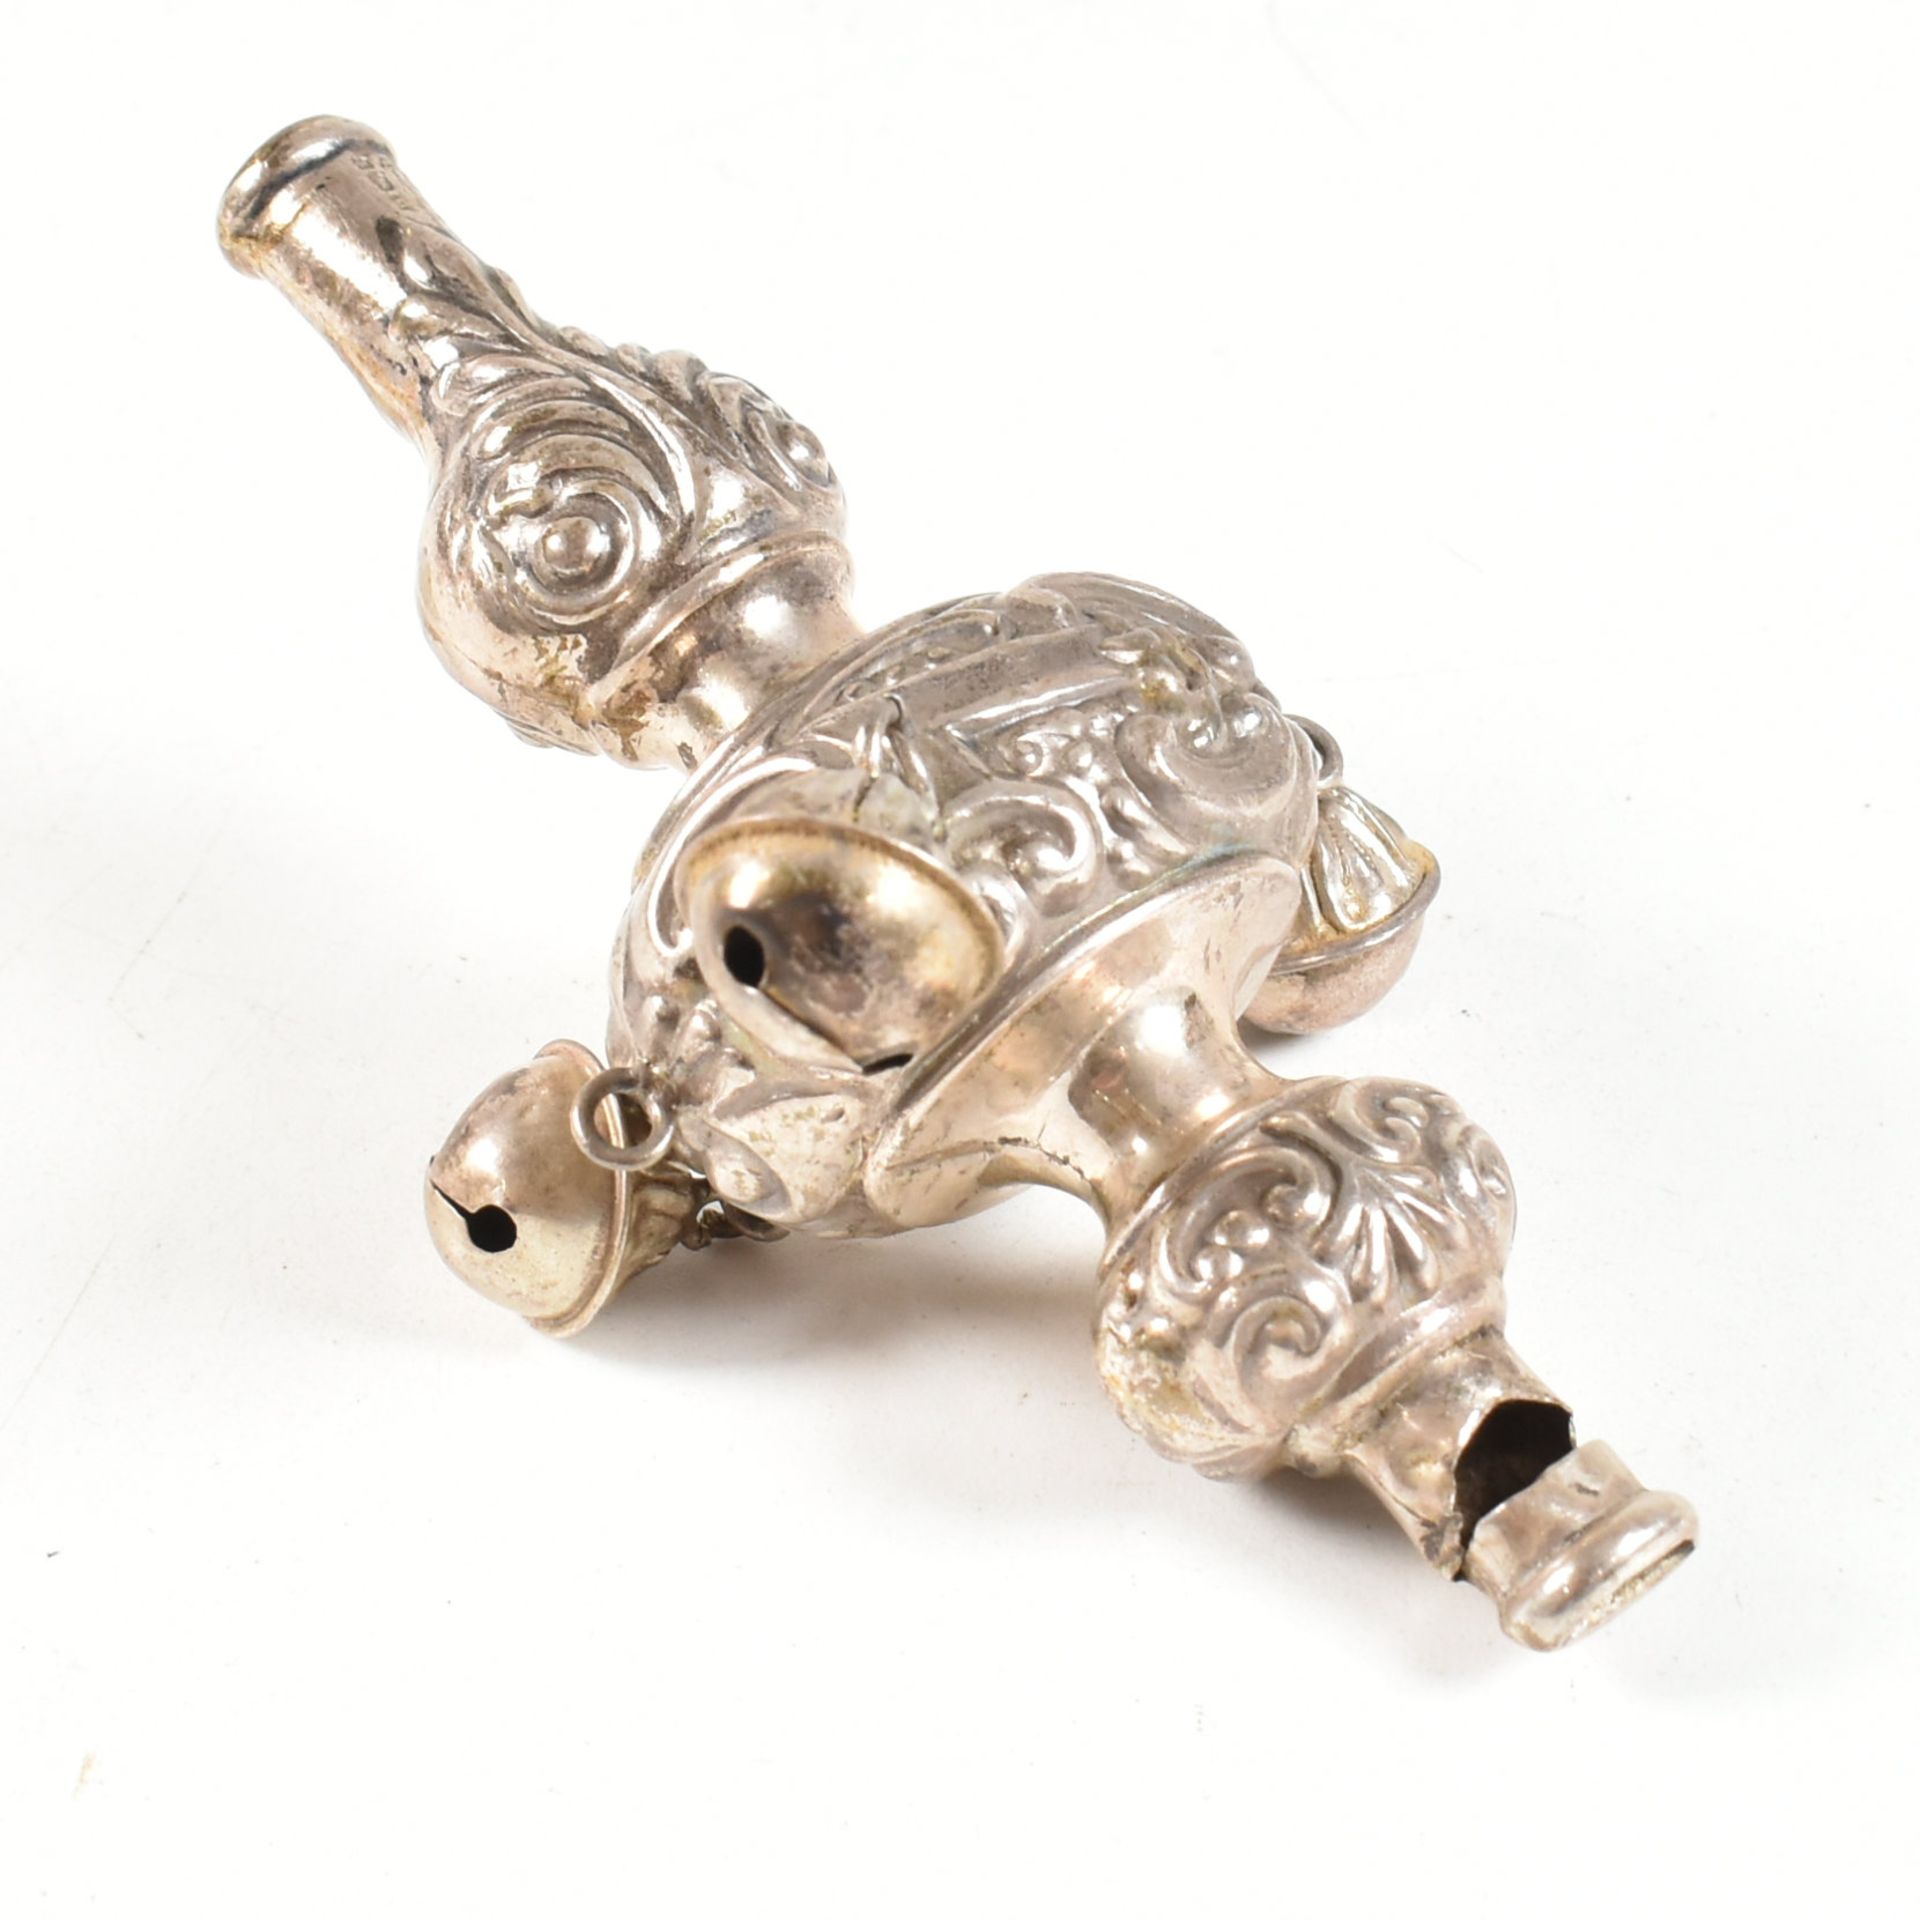 GEORGE V HALLMARKED SILVER BABYS COMBINATION RATTLE WHISTLE - Image 4 of 6